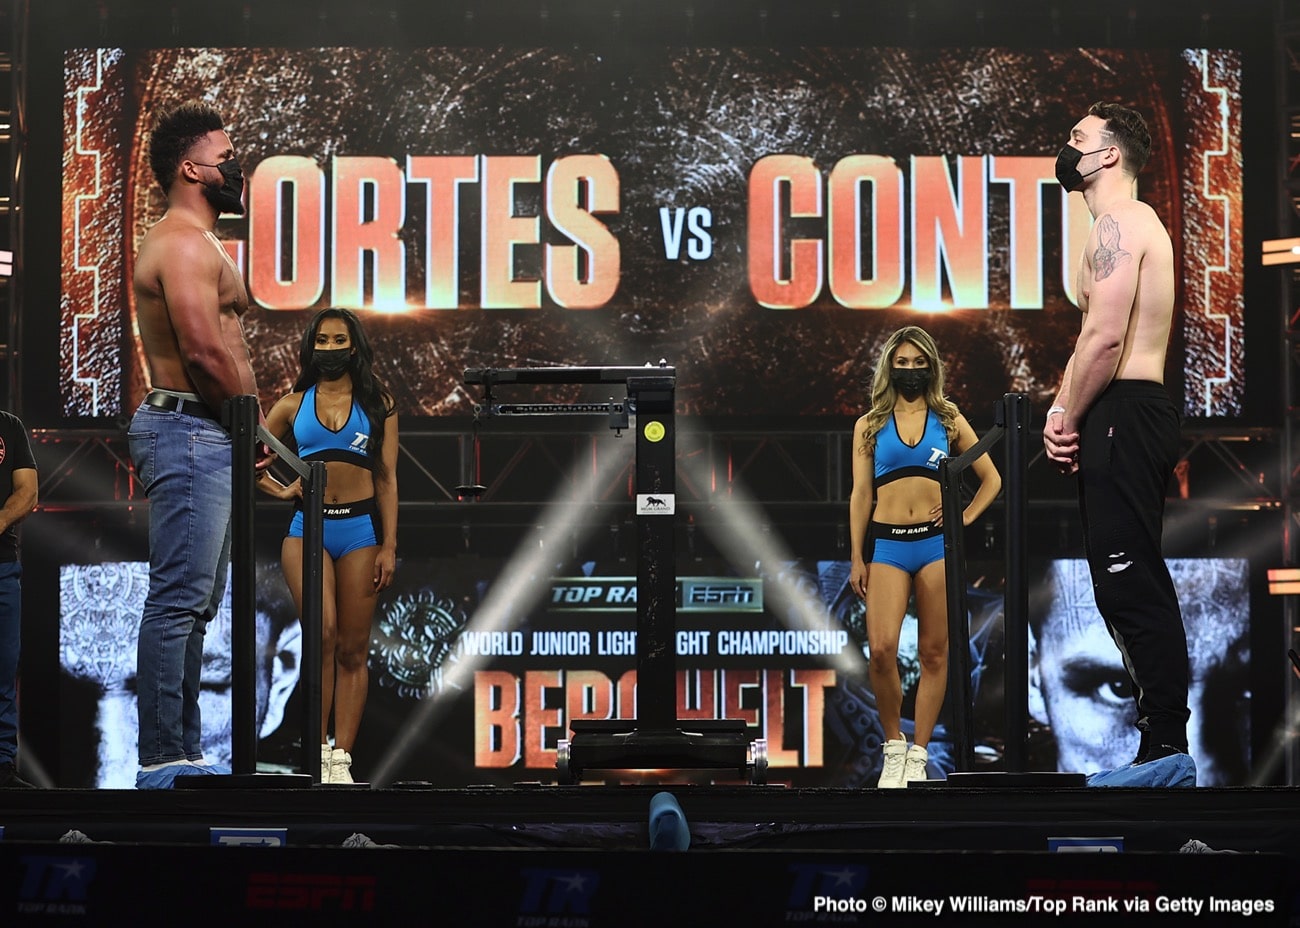 Image: Miguel Berchelt 130 lbs vs. Oscar Valdez 130 lbs - Weigh-in results